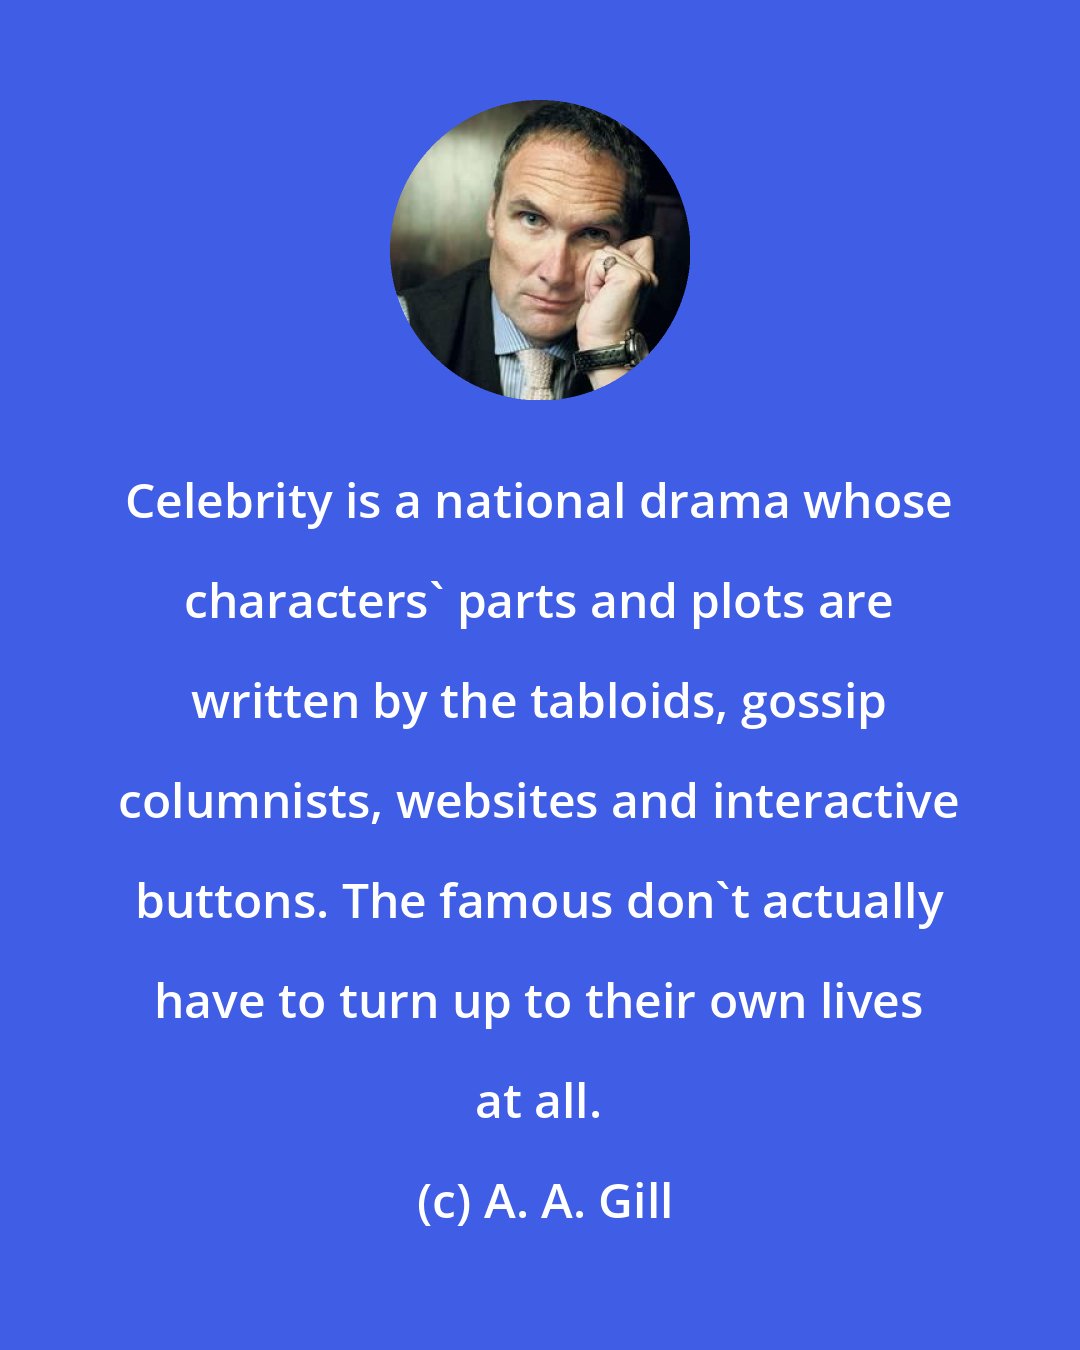 A. A. Gill: Celebrity is a national drama whose characters' parts and plots are written by the tabloids, gossip columnists, websites and interactive buttons. The famous don't actually have to turn up to their own lives at all.